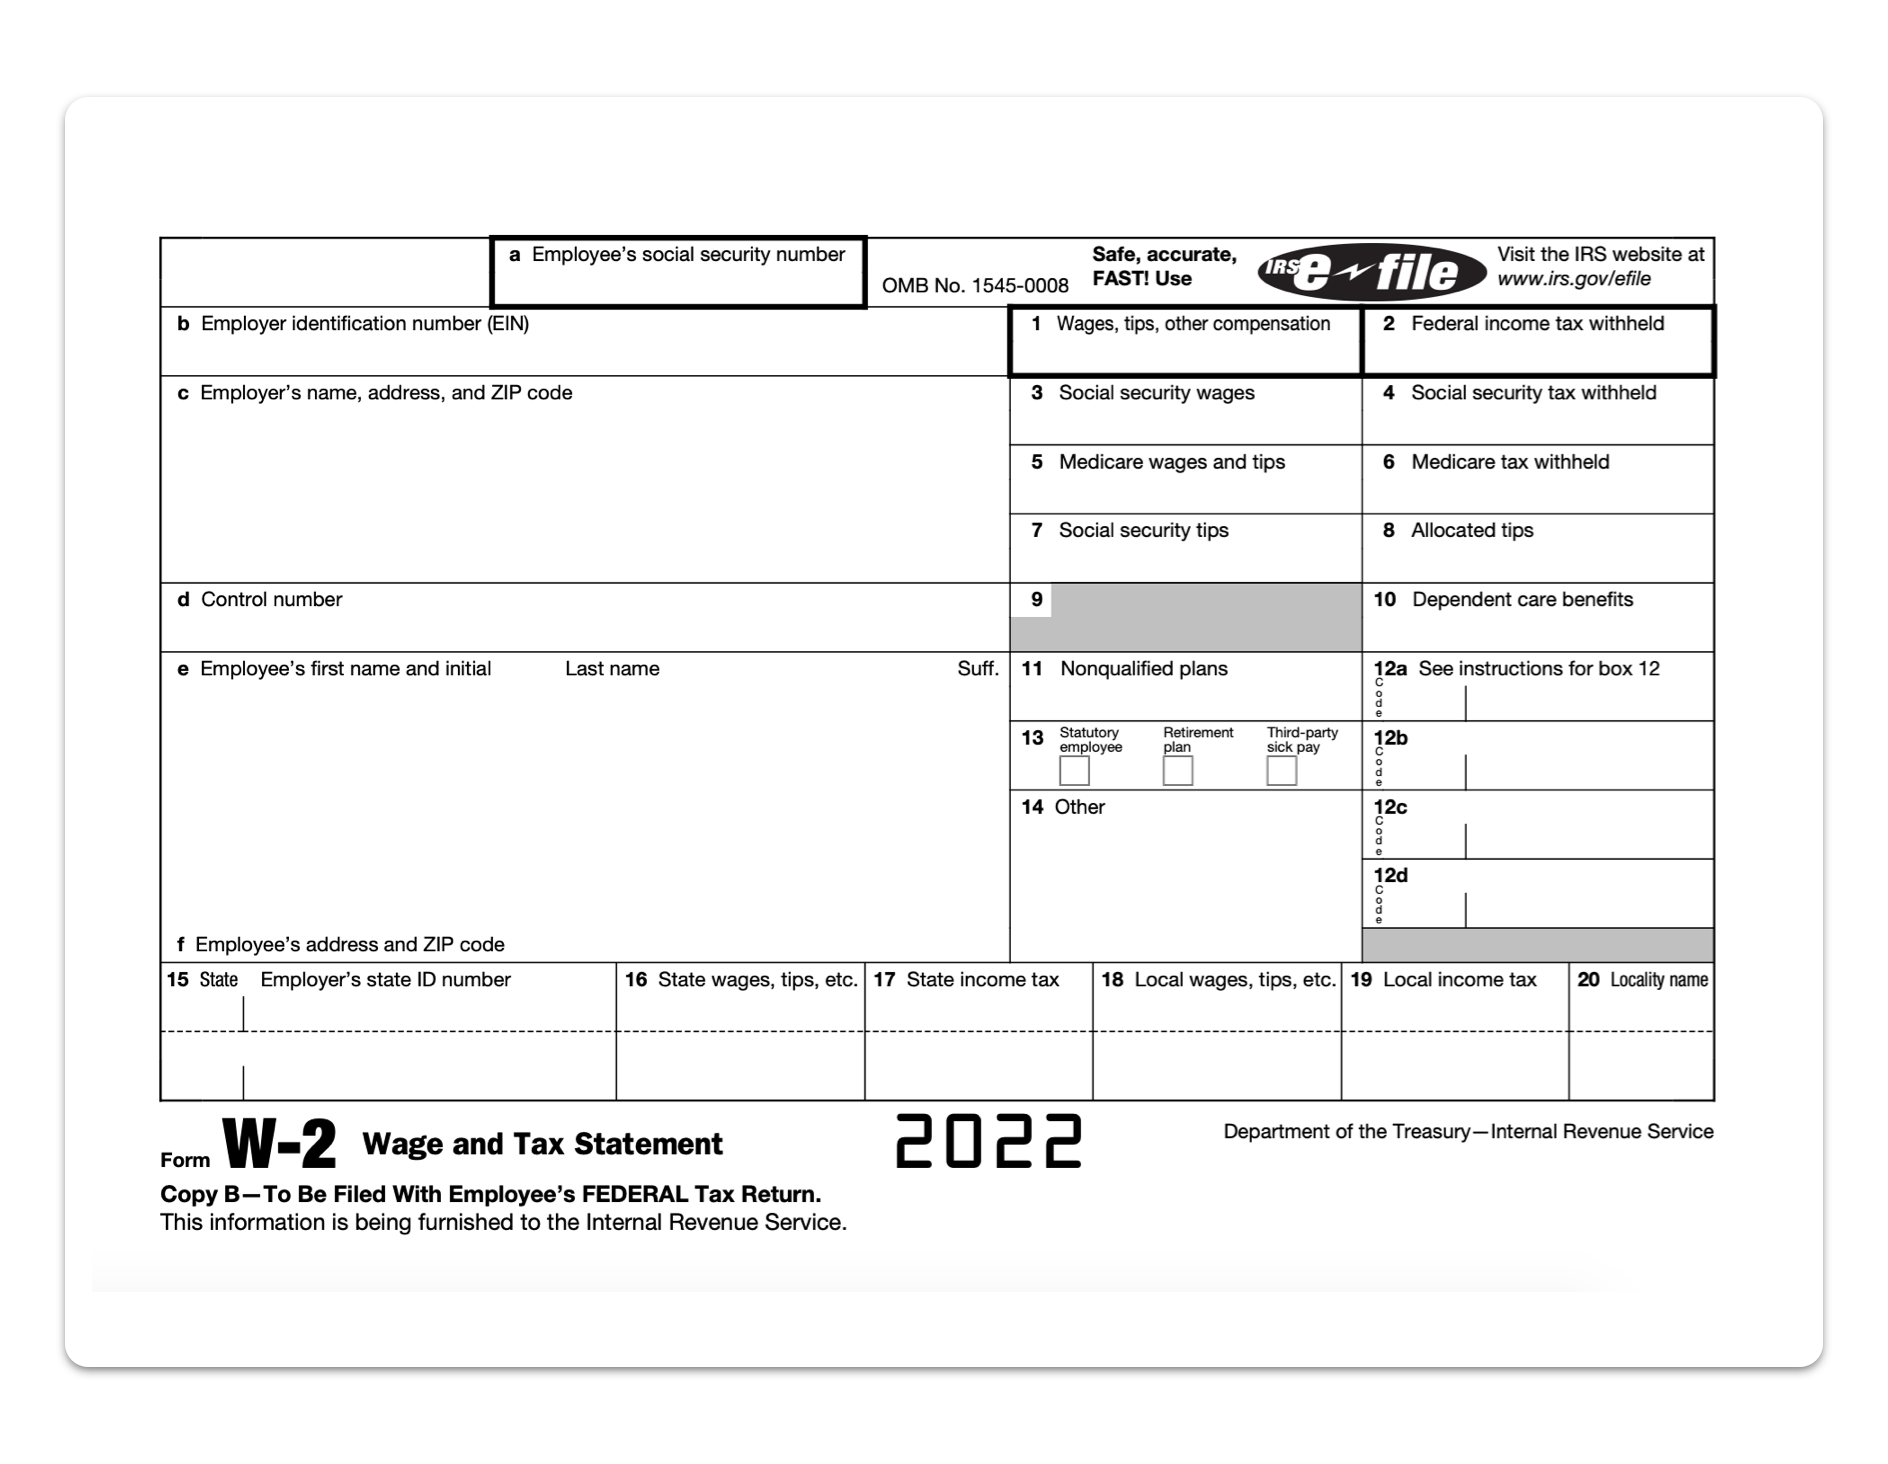 Your Guide To The W-2 Form: Wage And Tax Statement - Hourly, Inc. inside Find W2 Form